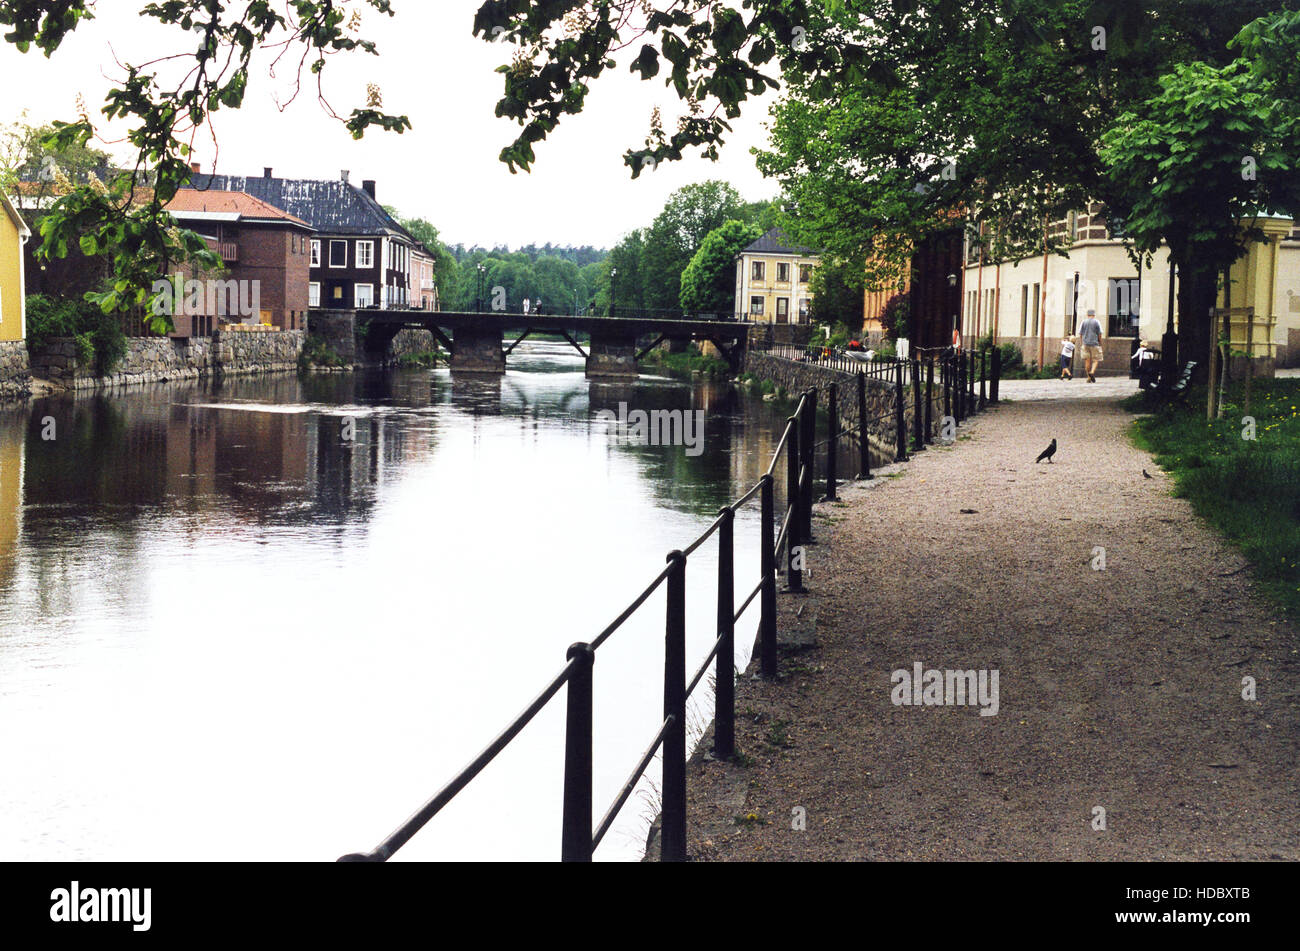 ARBOGA Vestmanland Old Homes along the River 2013 Stock Photo